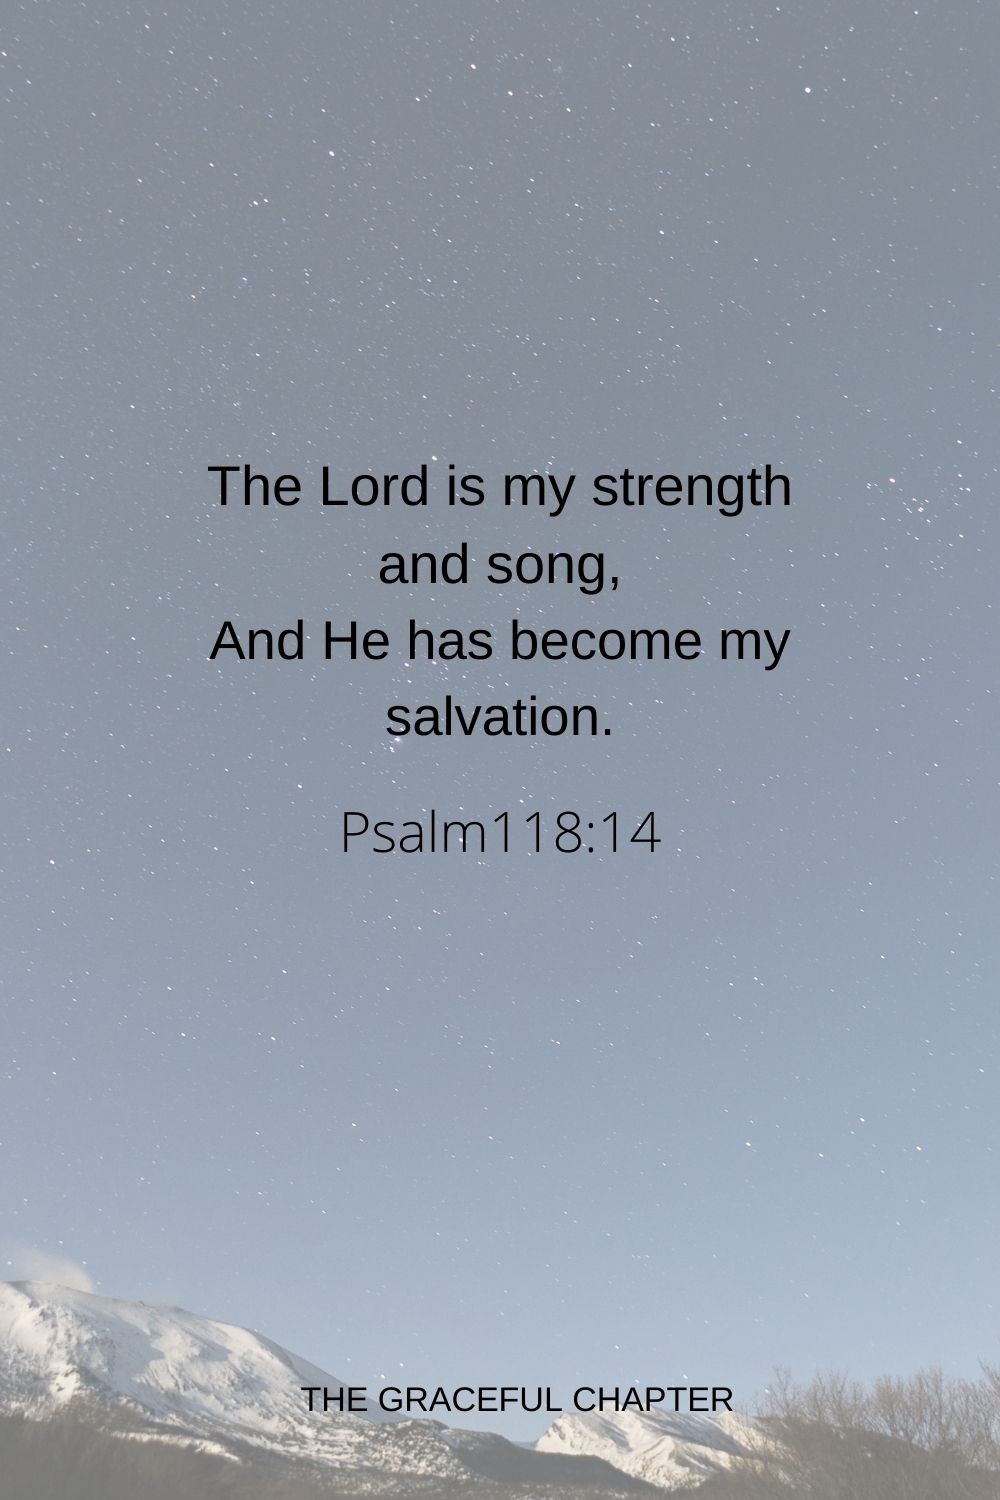 The Lord is my strength and song, And He has become my salvation. Psalm118:14